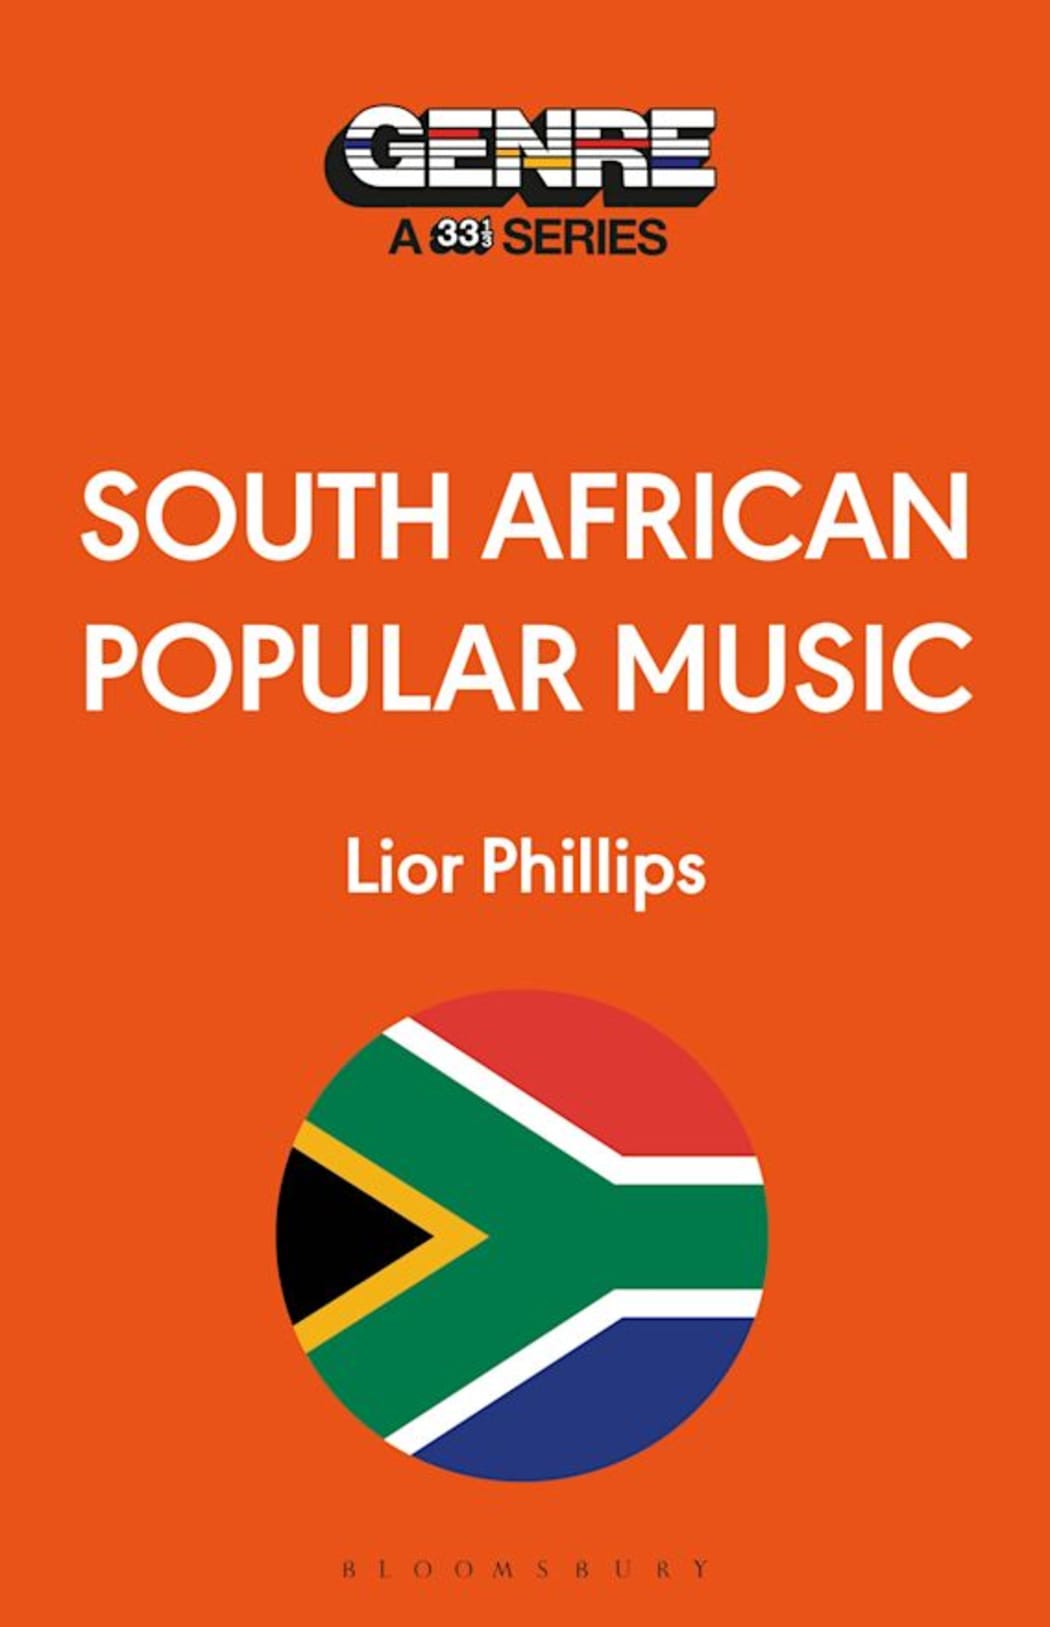 South African Popular Music book cover